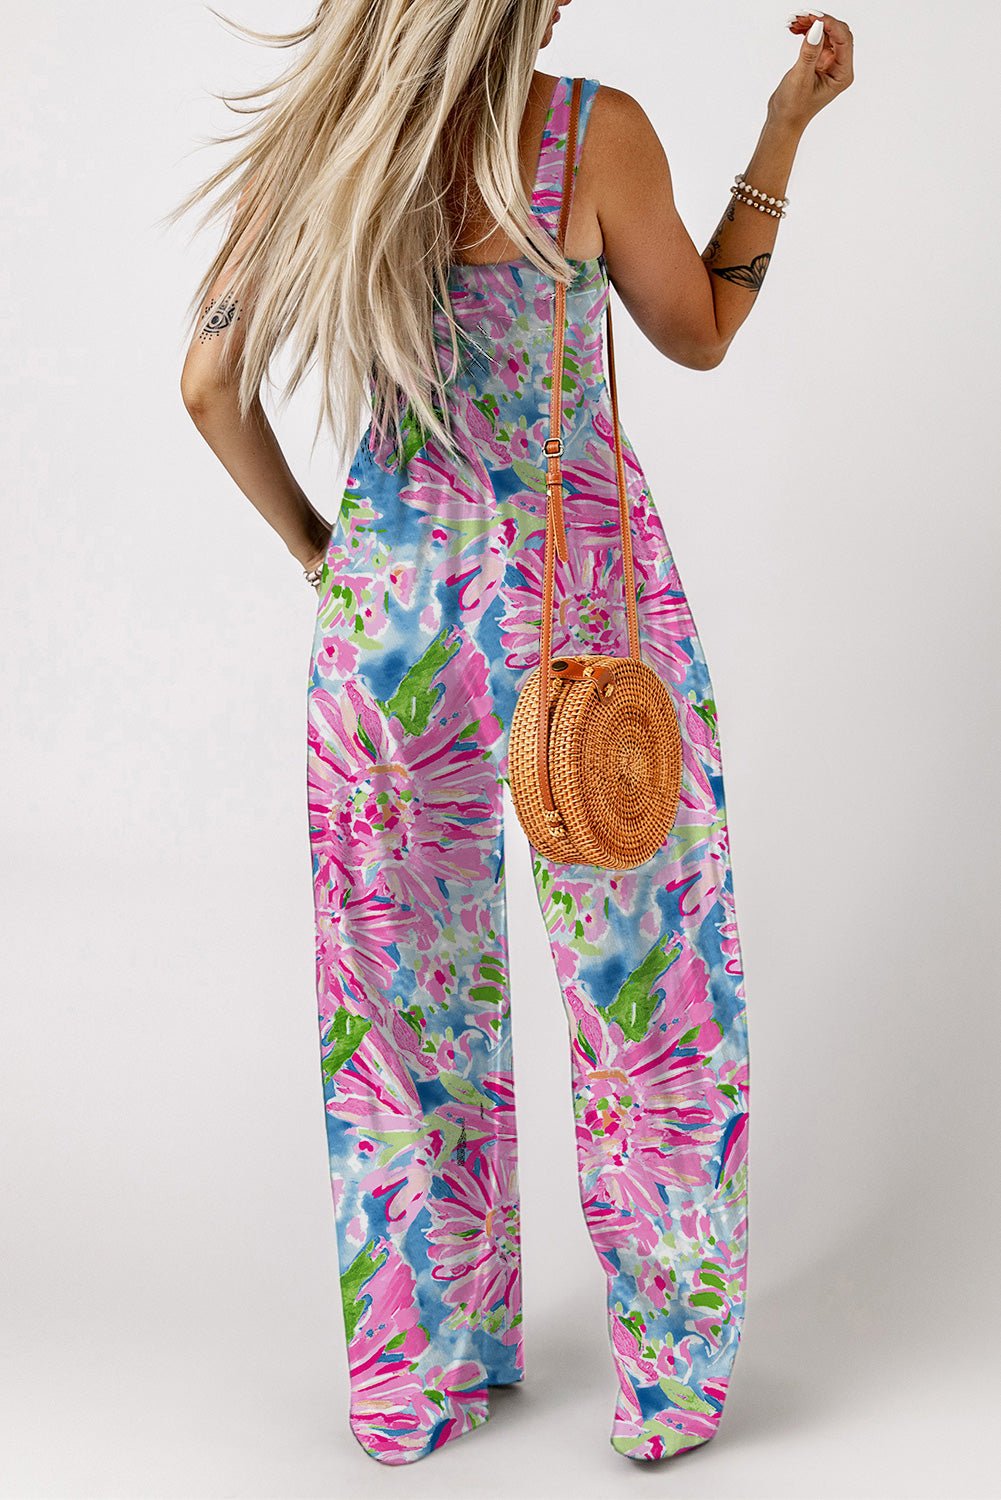 Women’s Floral Smocked Square Neck Jumpsuit with Pockets